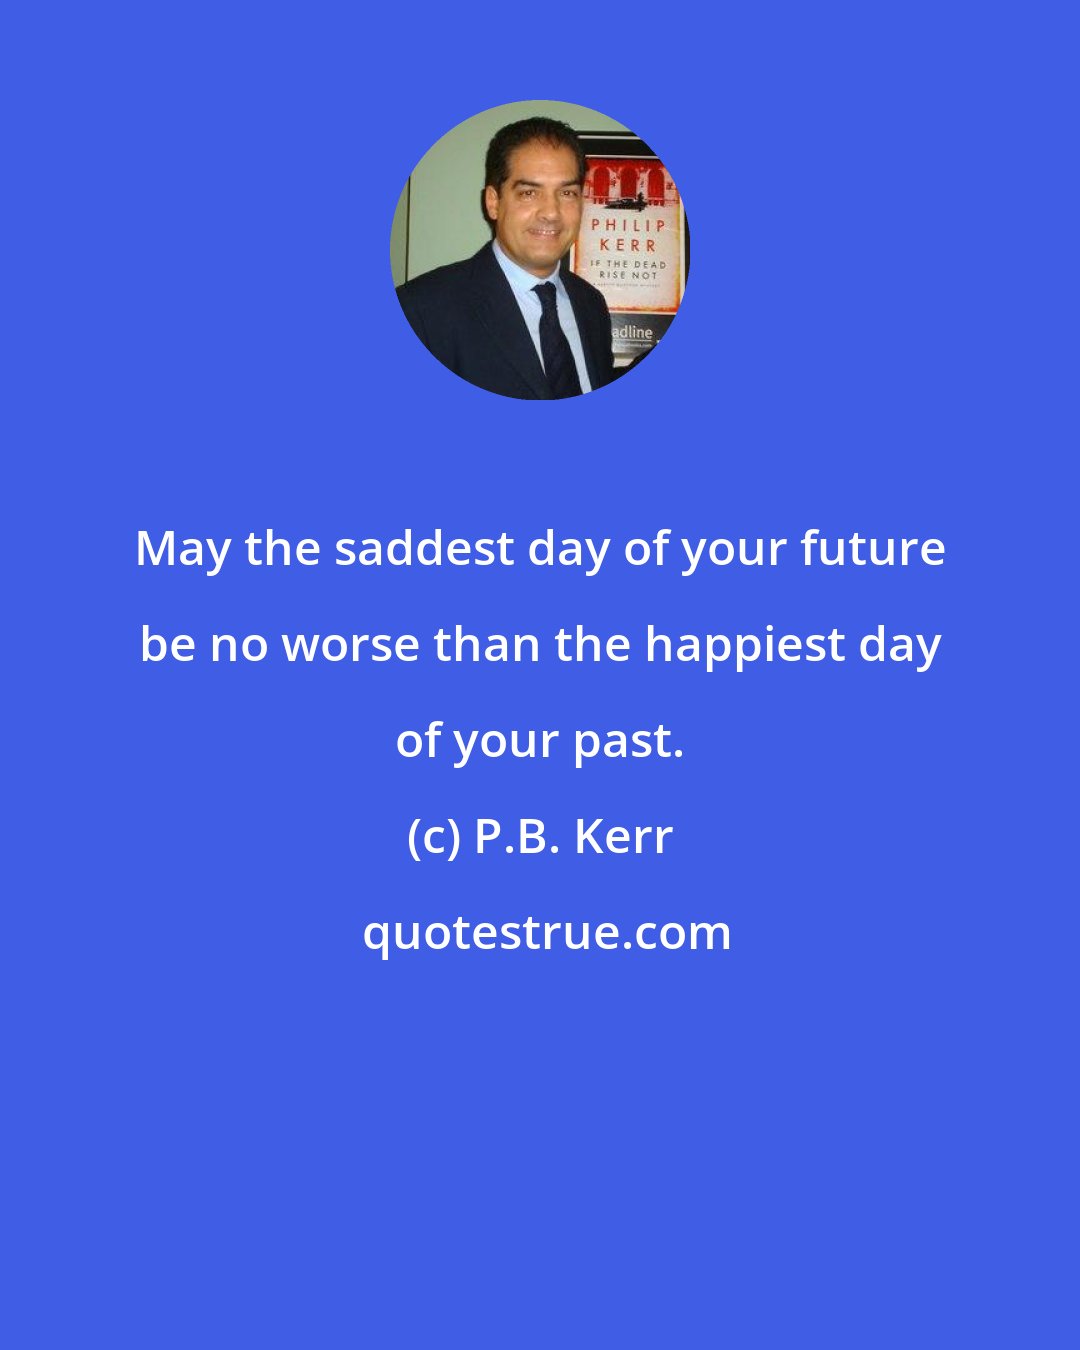 P.B. Kerr: May the saddest day of your future be no worse than the happiest day of your past.